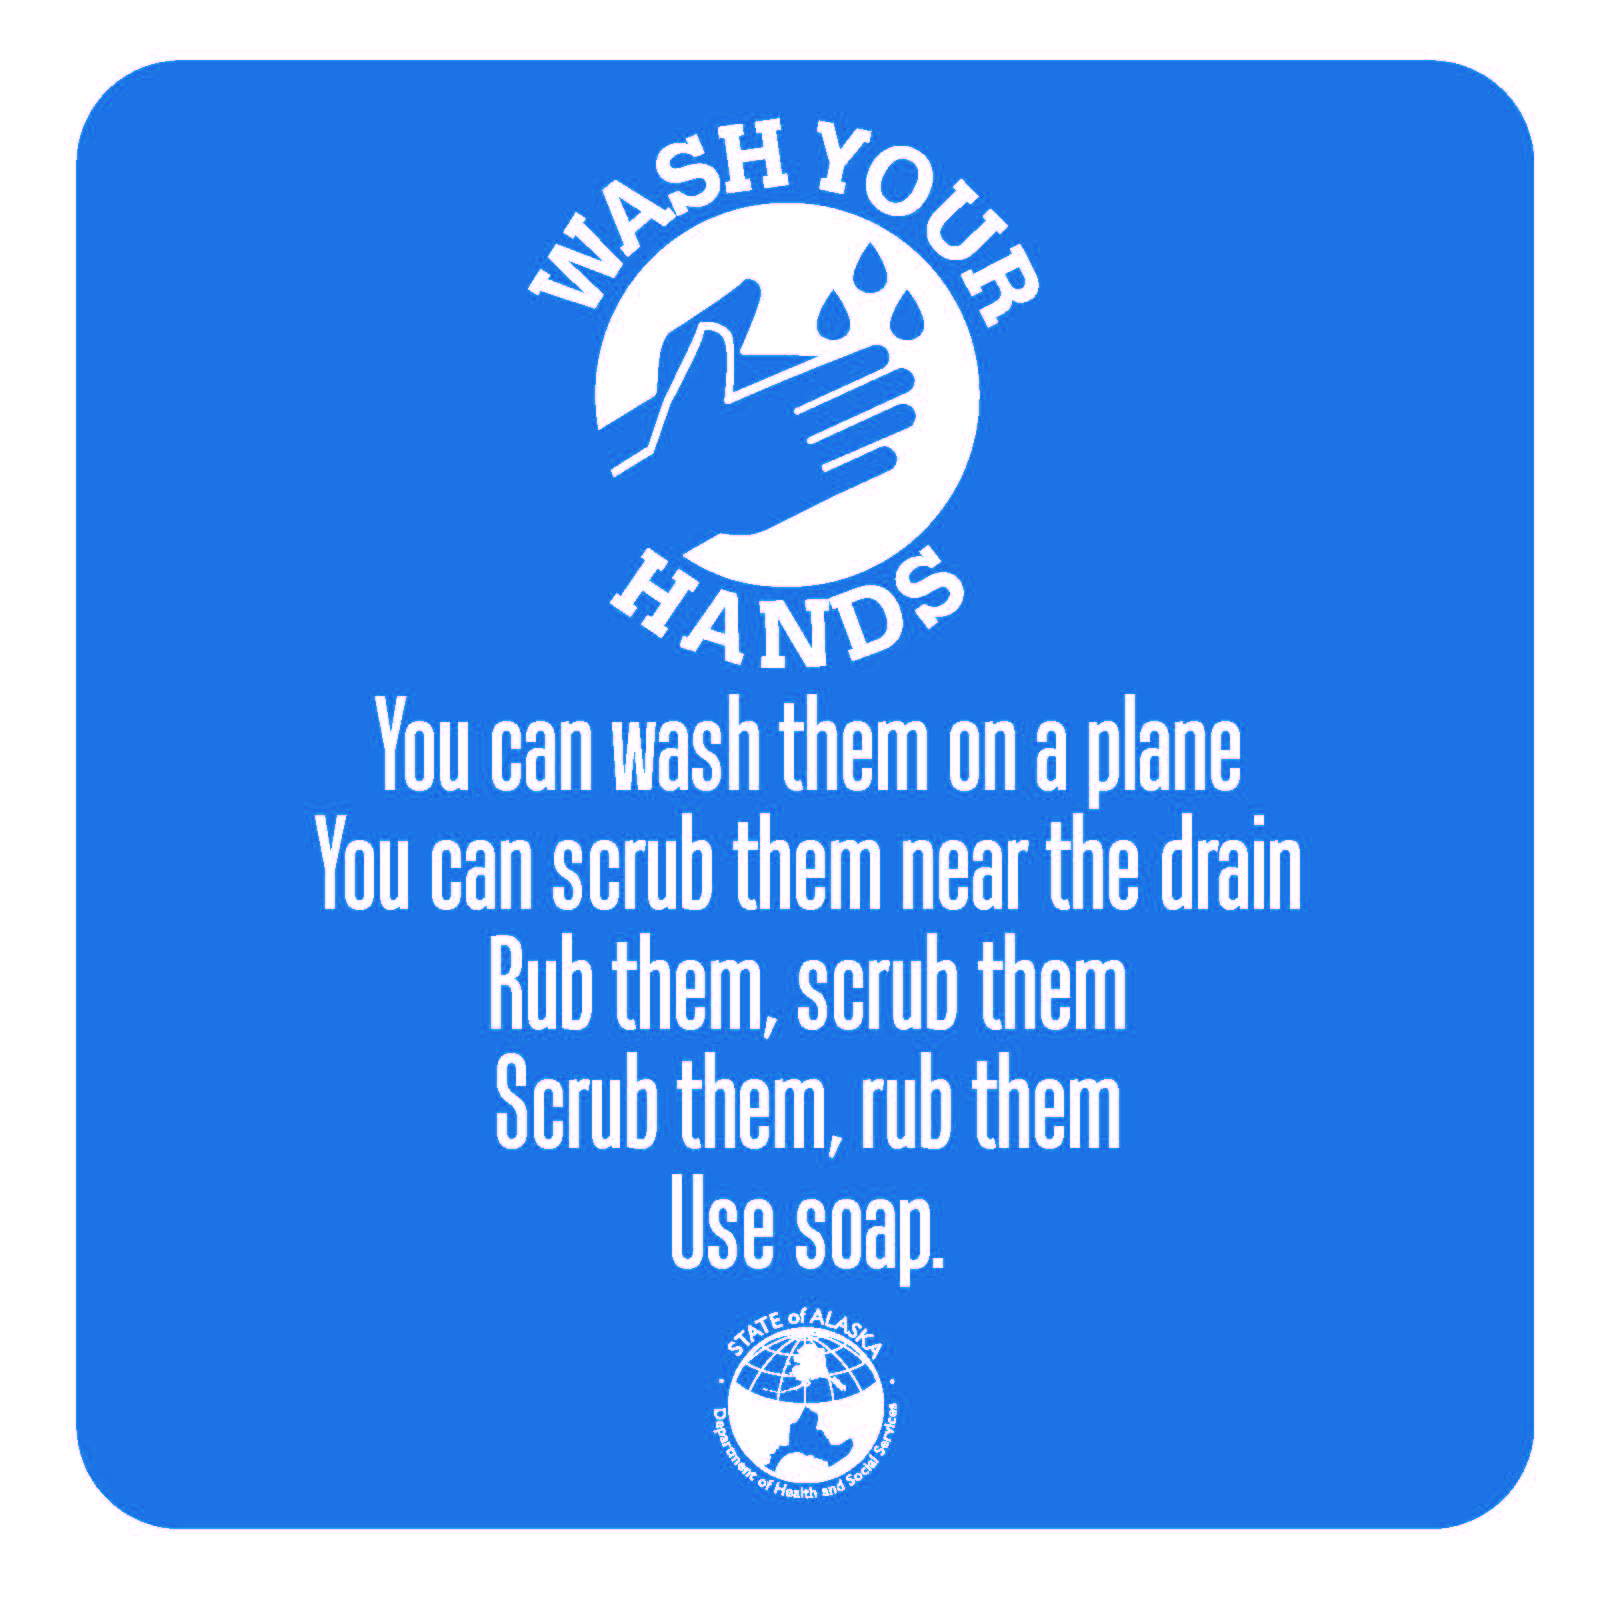 Wash your hands: You can wash them on a plane, you can scrub them near a drain. Rub them, scrub them, use soap.